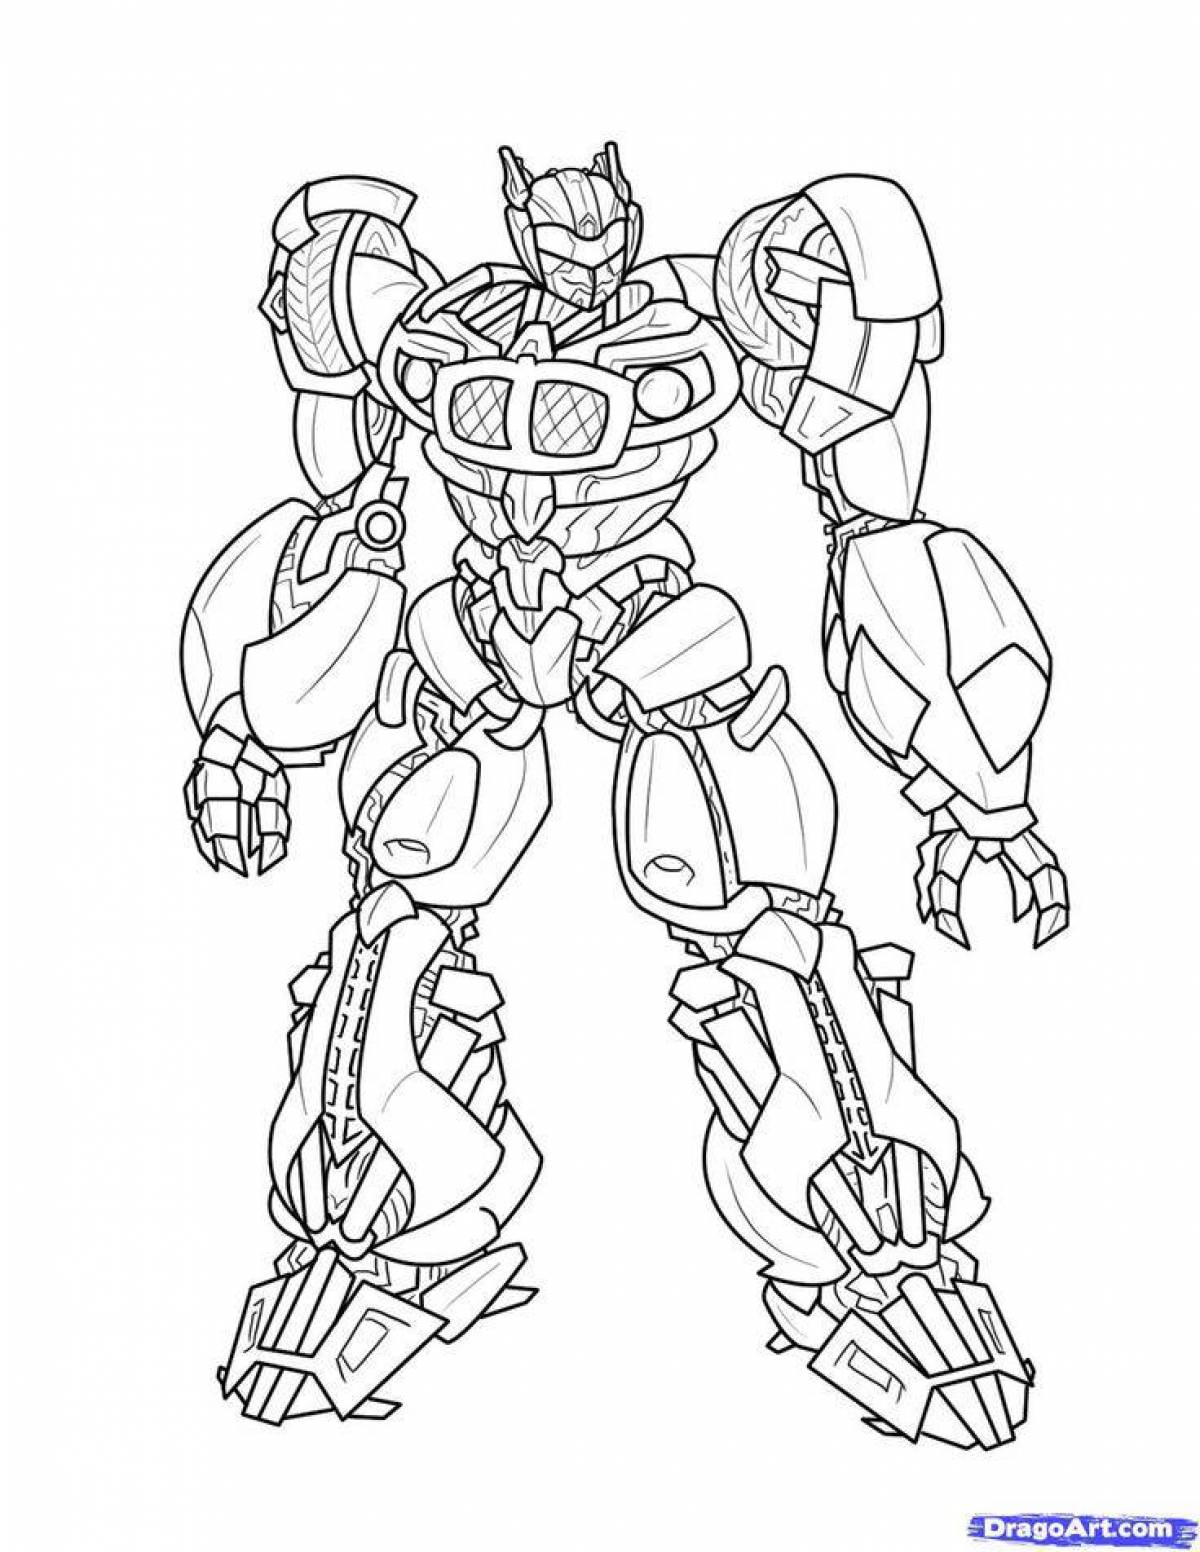 Attractive transformers coloring pages for kids